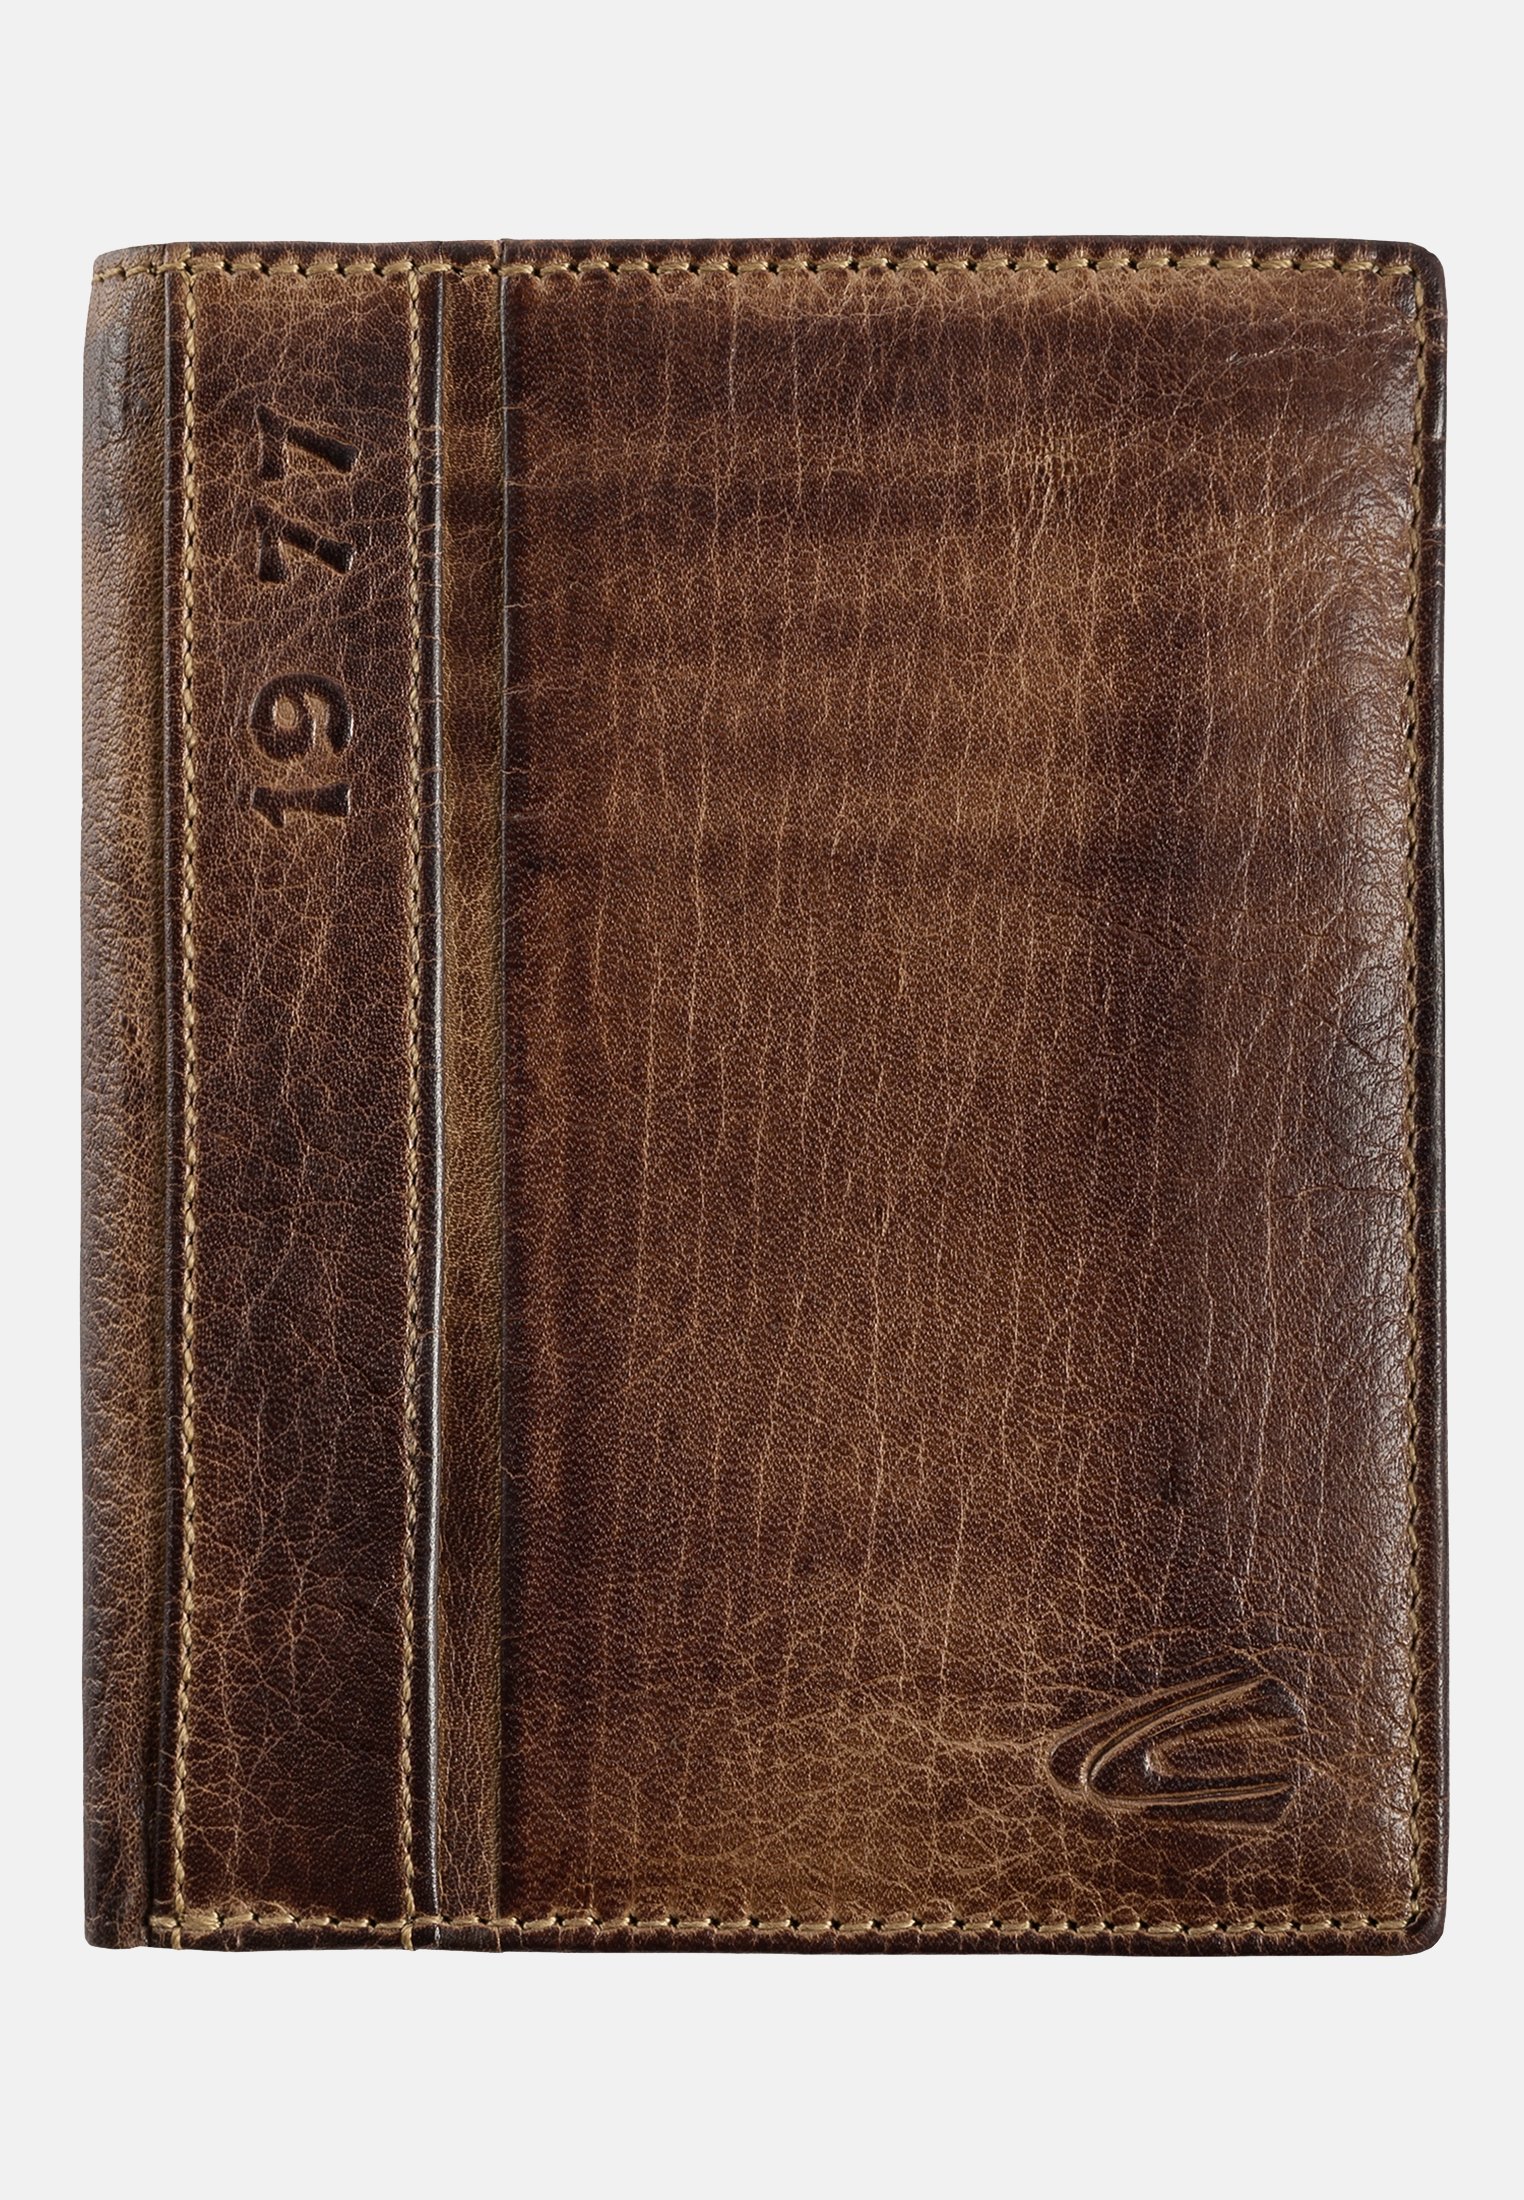 Camel Active Wallet made of leather